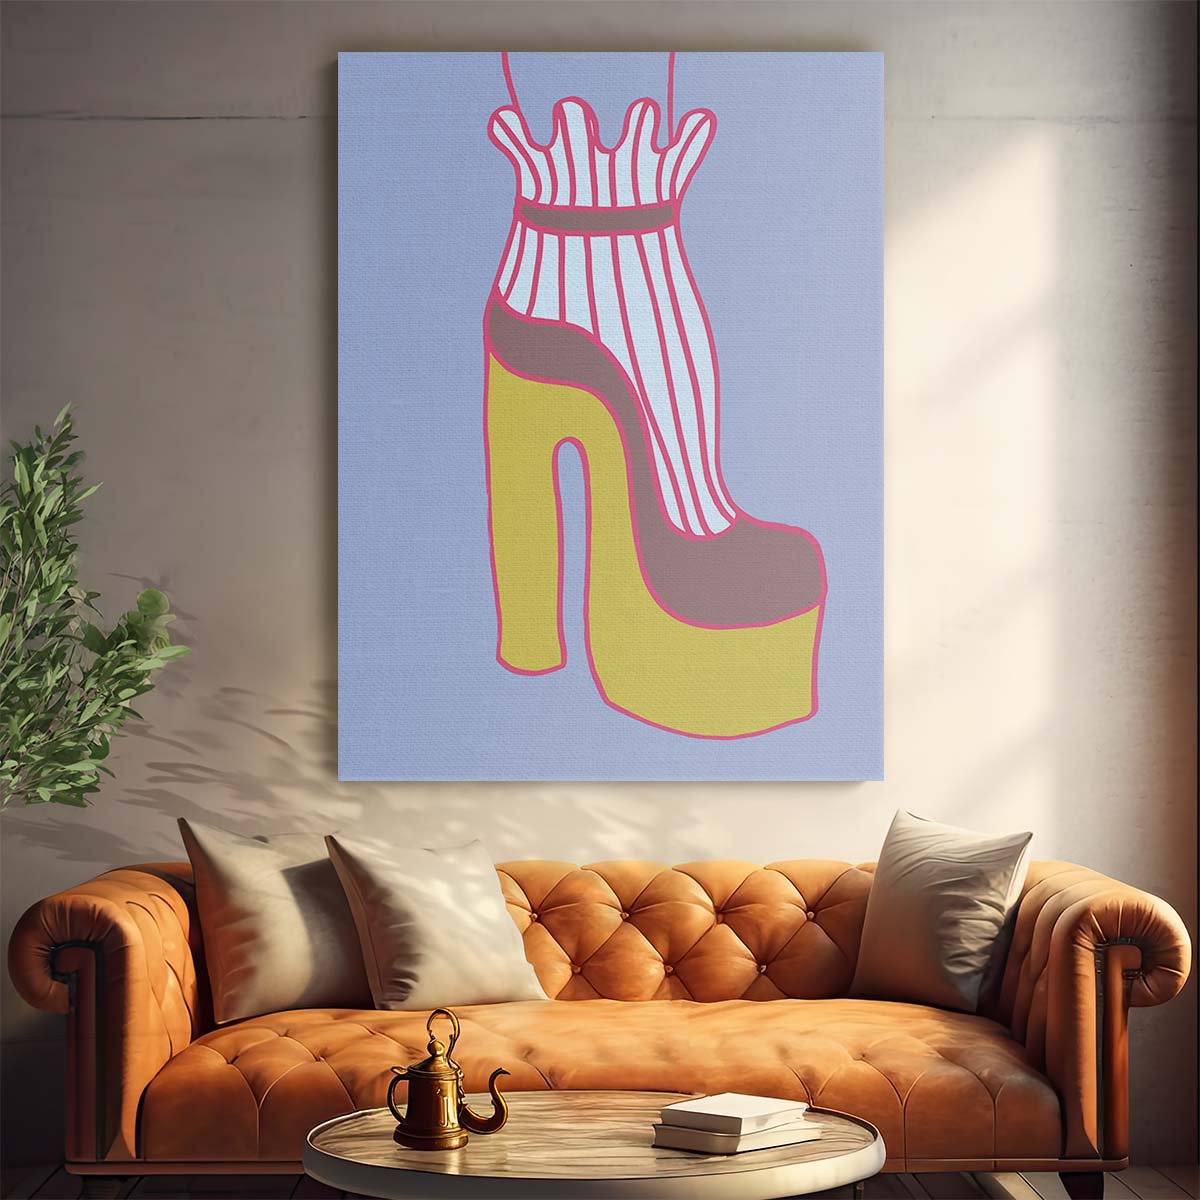 High Heel Pumps Fashion Illustration, Graphic Foot Portrait Artwork by Luxuriance Designs, made in USA